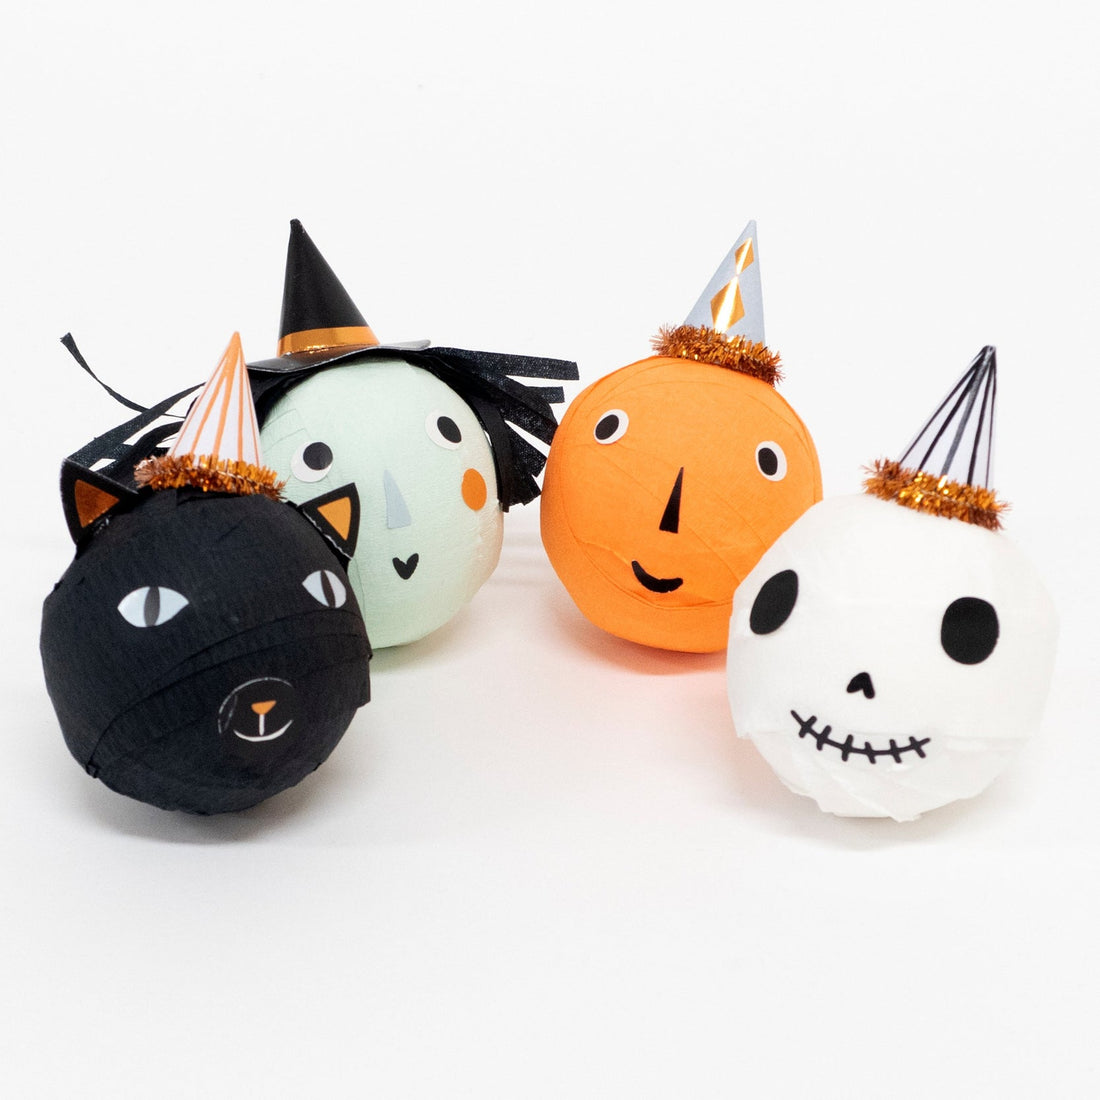 Four surprise balls; a witch, skull, black cat and pumpkin, all with charming little hats with copper foil detail